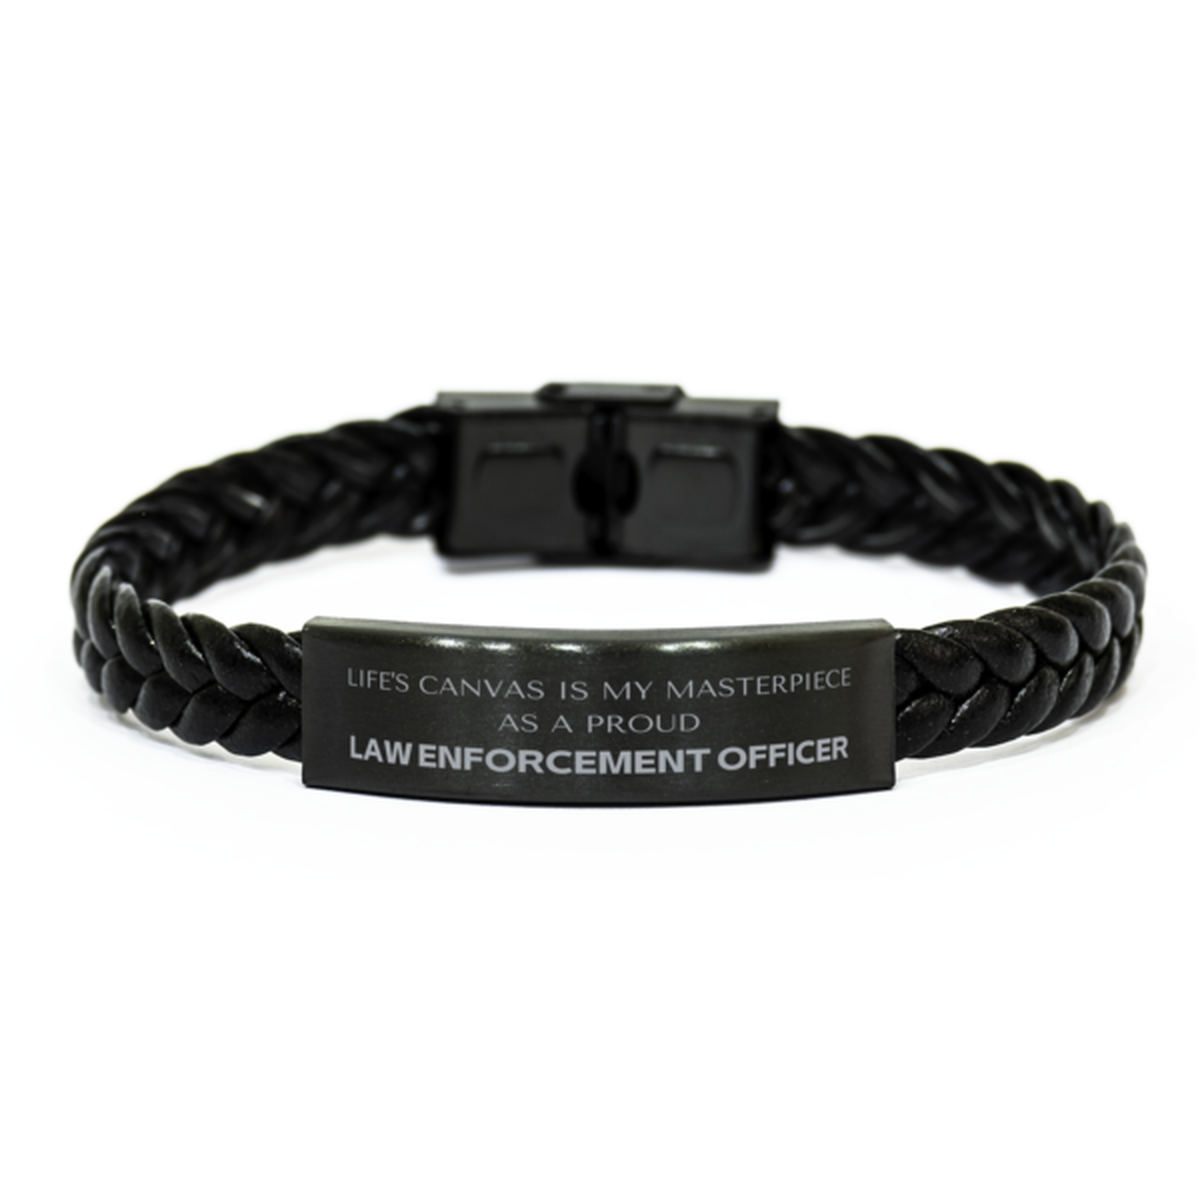 Proud Law Enforcement Officer Gifts, Life's canvas is my masterpiece, Epic Birthday Christmas Unique Braided Leather Bracelet For Law Enforcement Officer, Coworkers, Men, Women, Friends